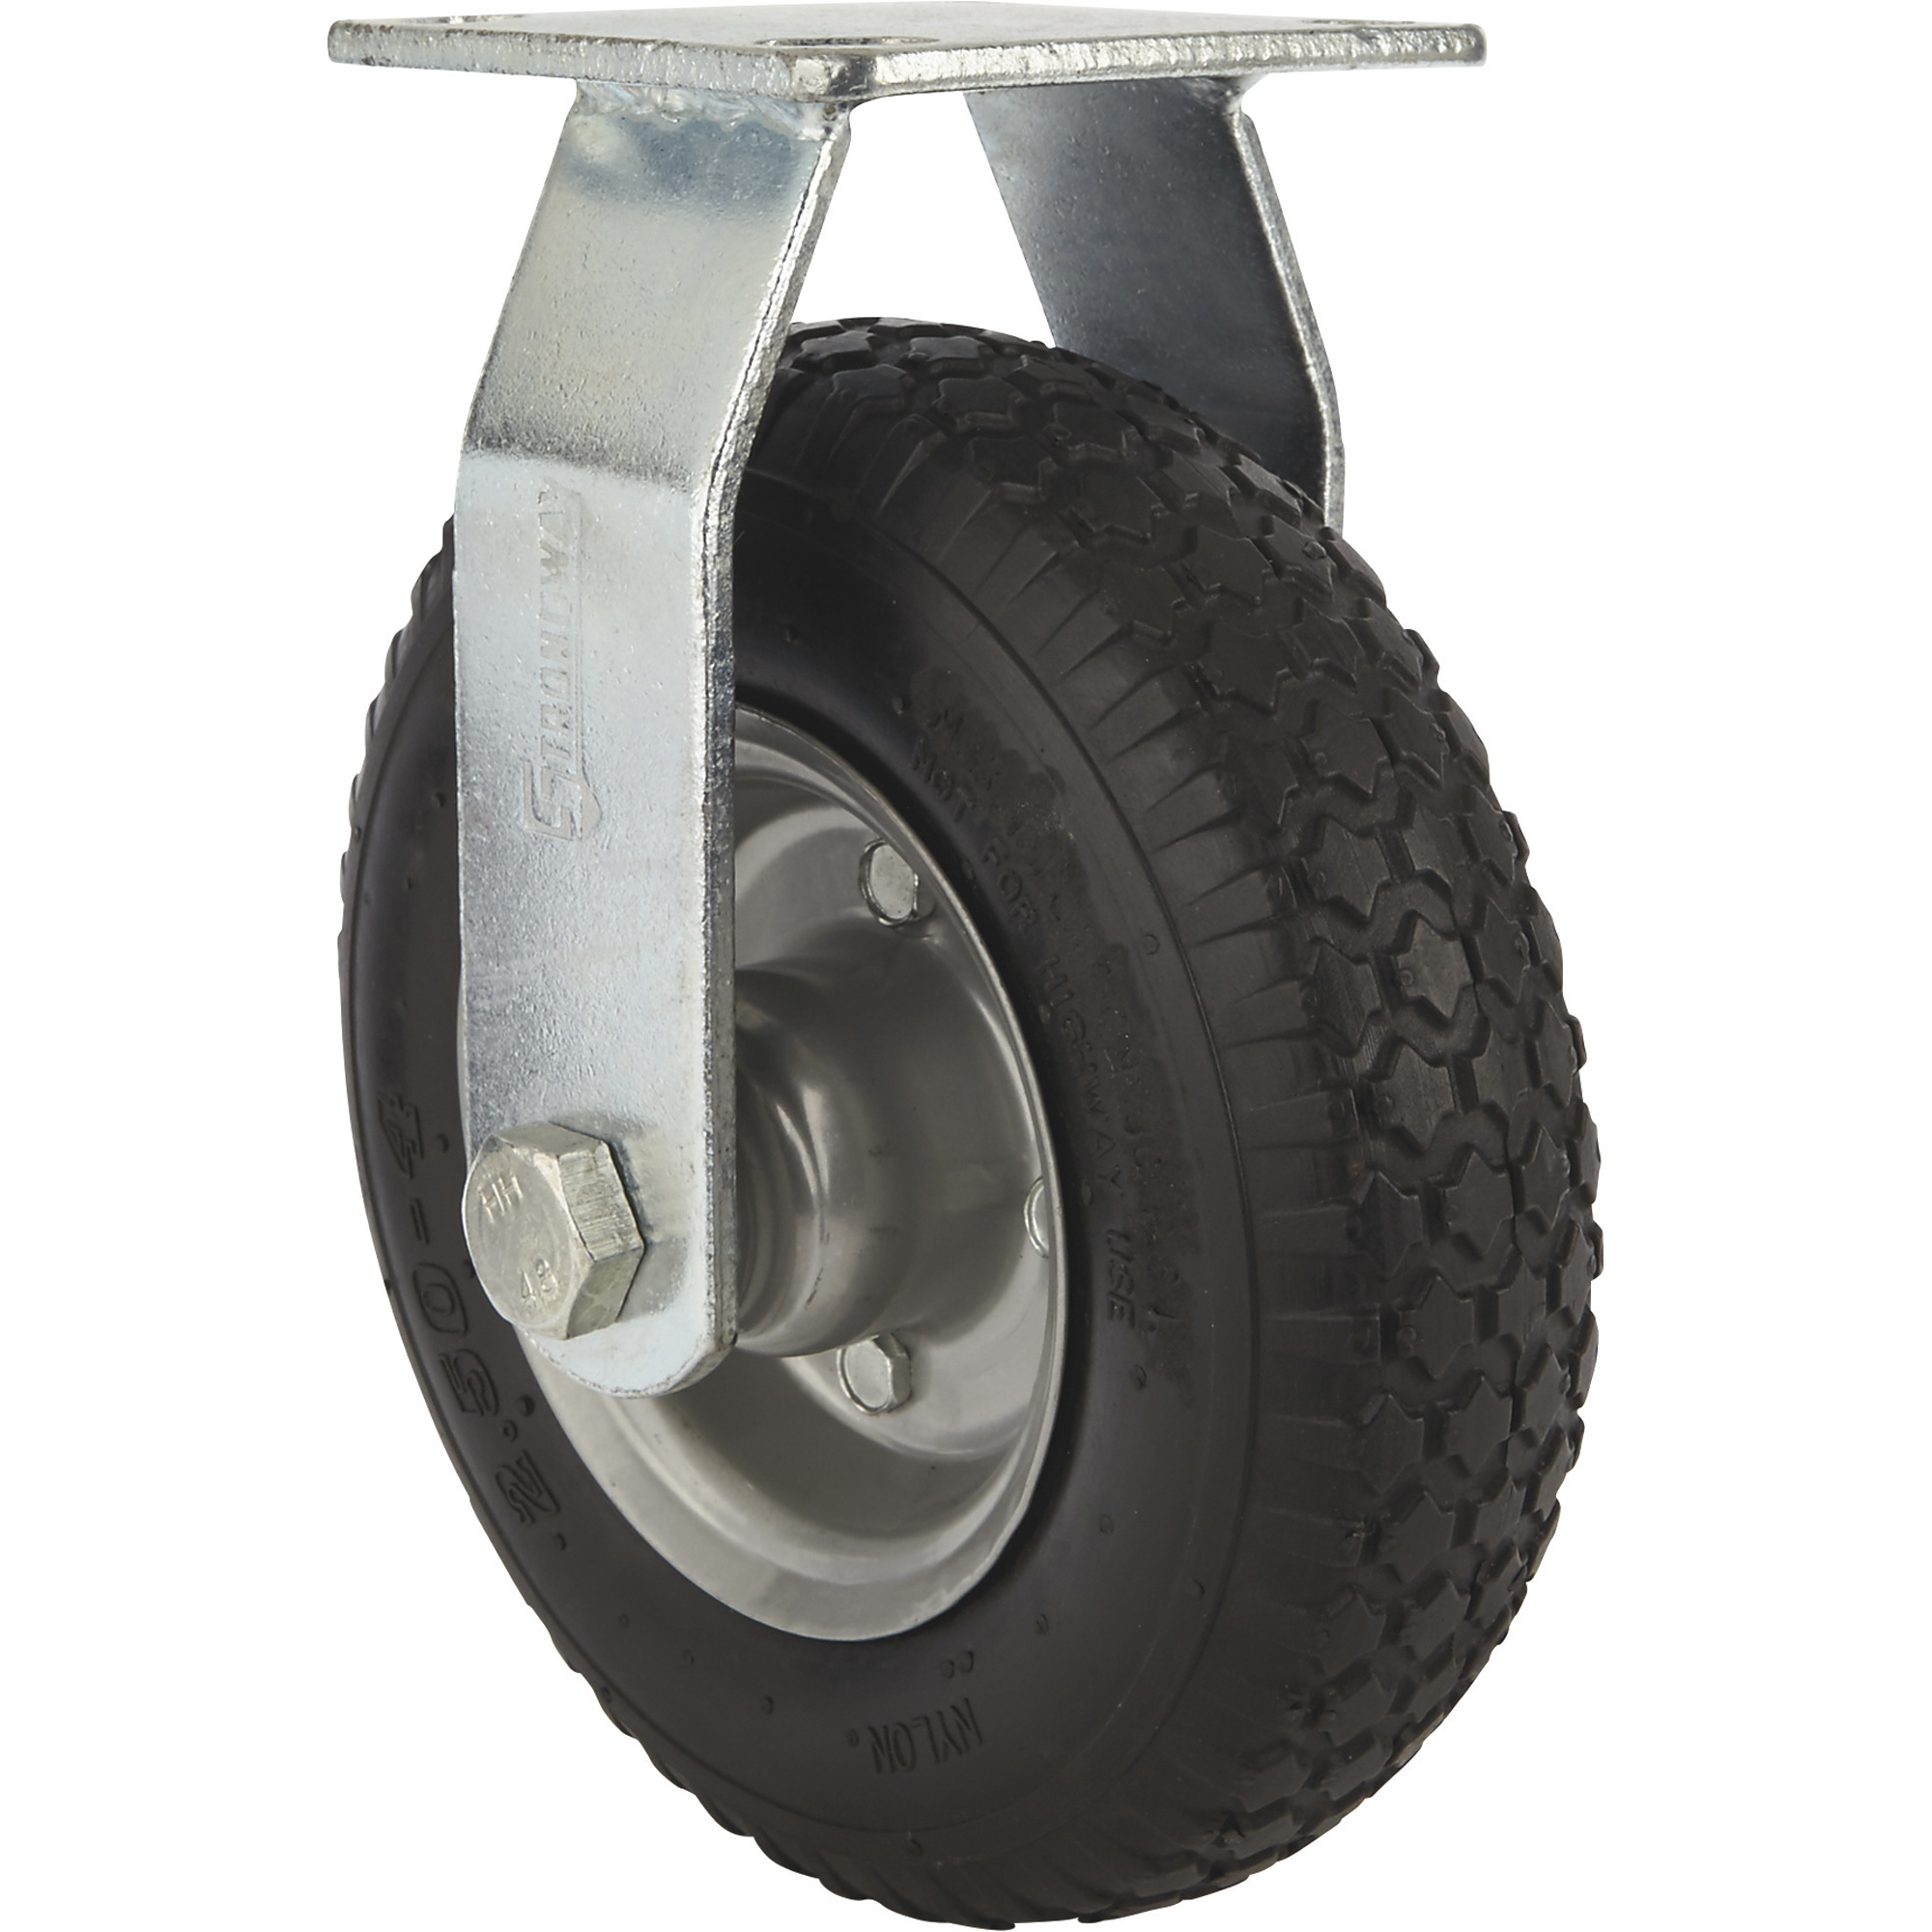 Strongway 8Inch Rigid Flat-Free Rubber Foam-Filled Caster, 250-Lb. Capacity, Knobby Tread